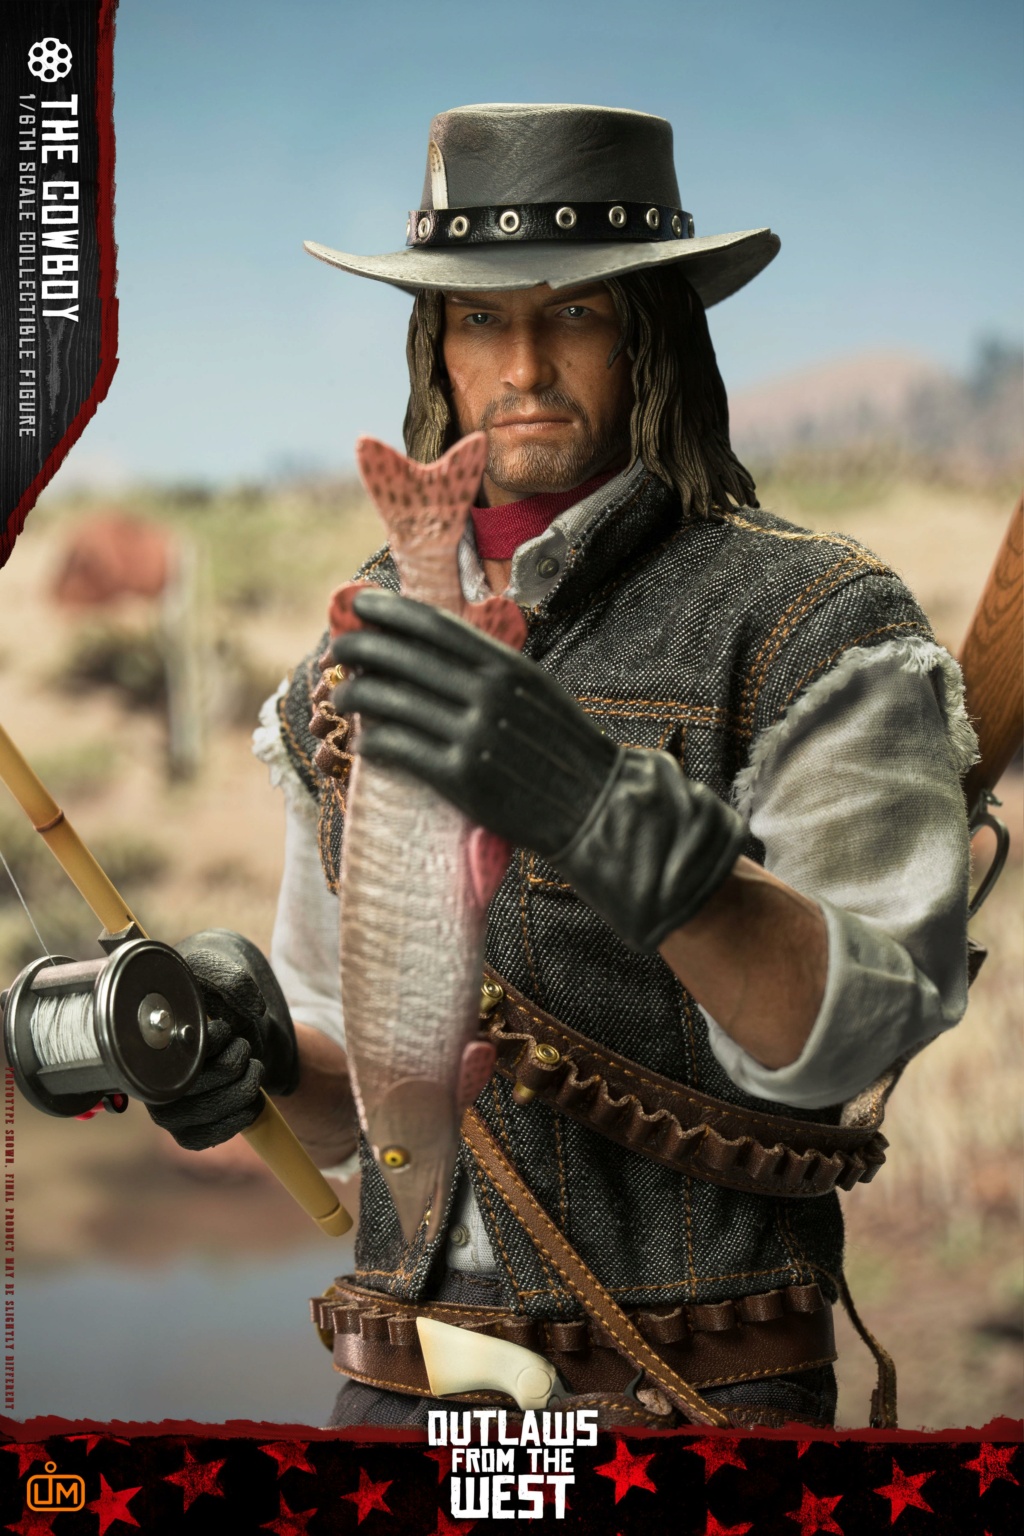 videogame-based - NEW PRODUCT: LIM TOYS: Outlaws of the West Series: The Cowboy 1/6 scale action figure 41695010